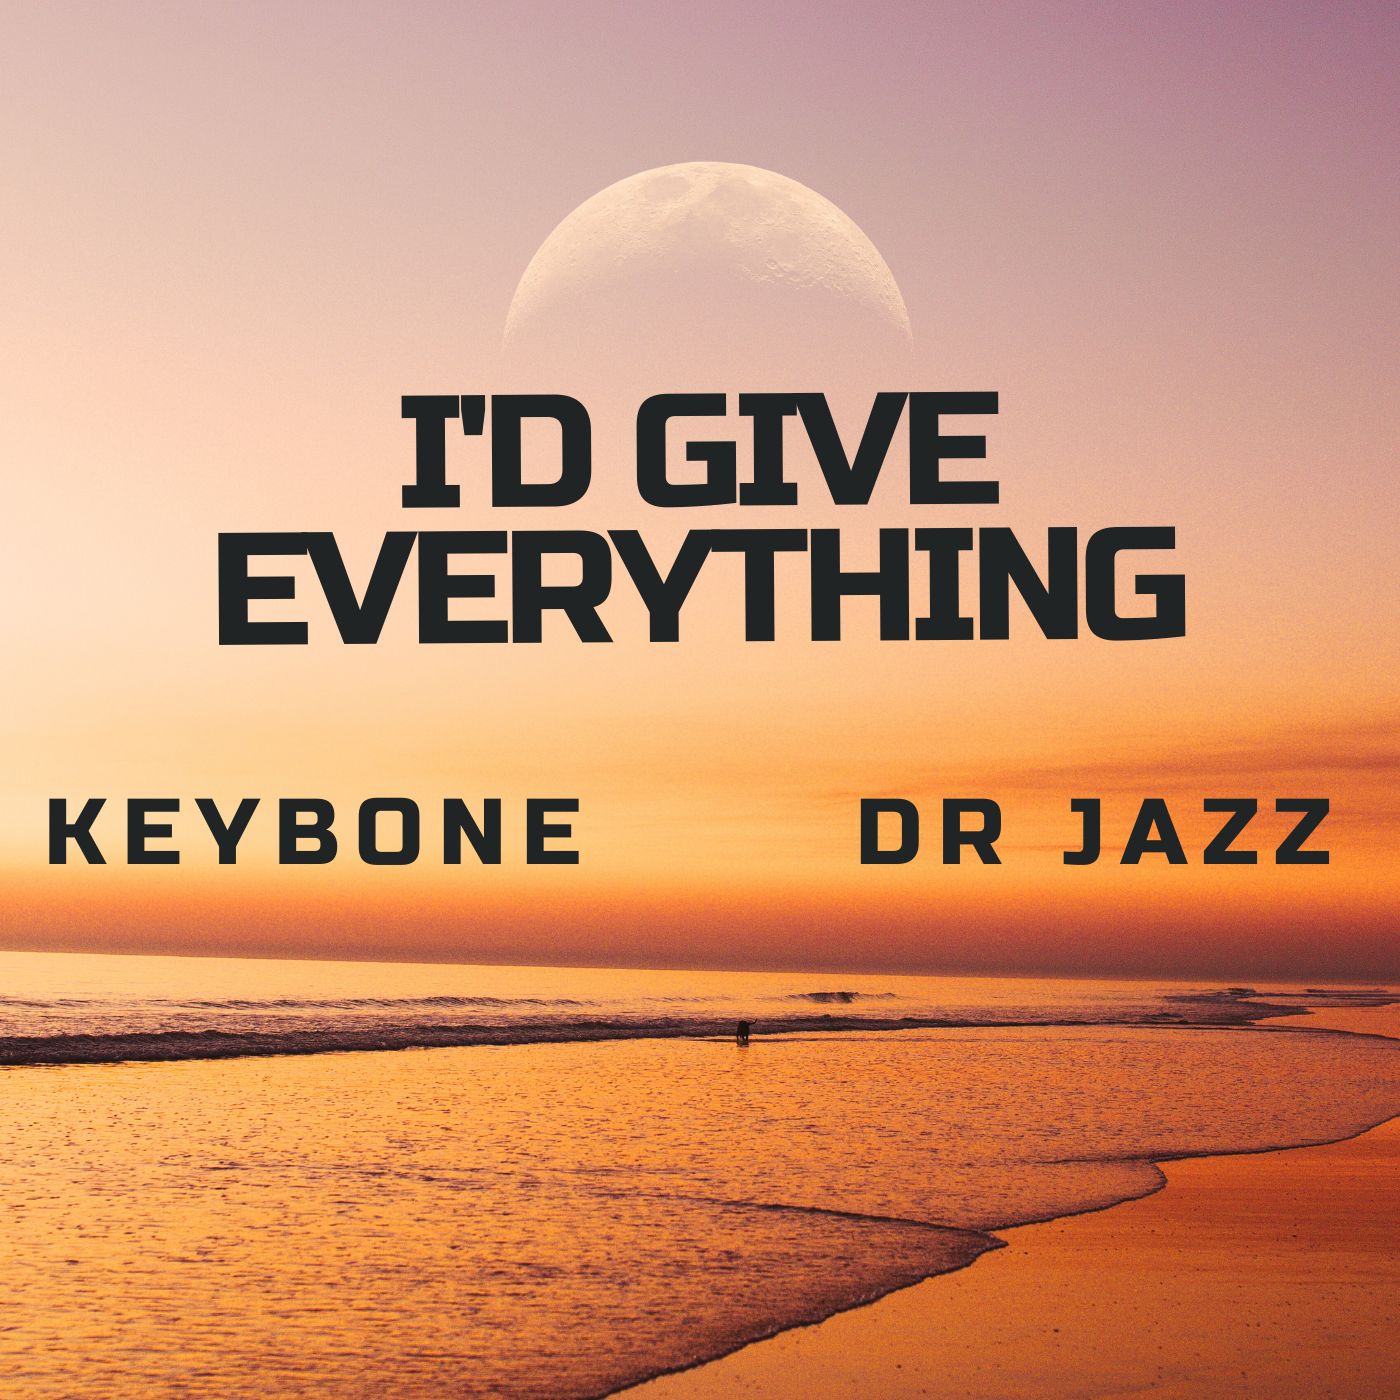 New Music: Keybone – I’d Give Everything (feat. Dr Jazz)